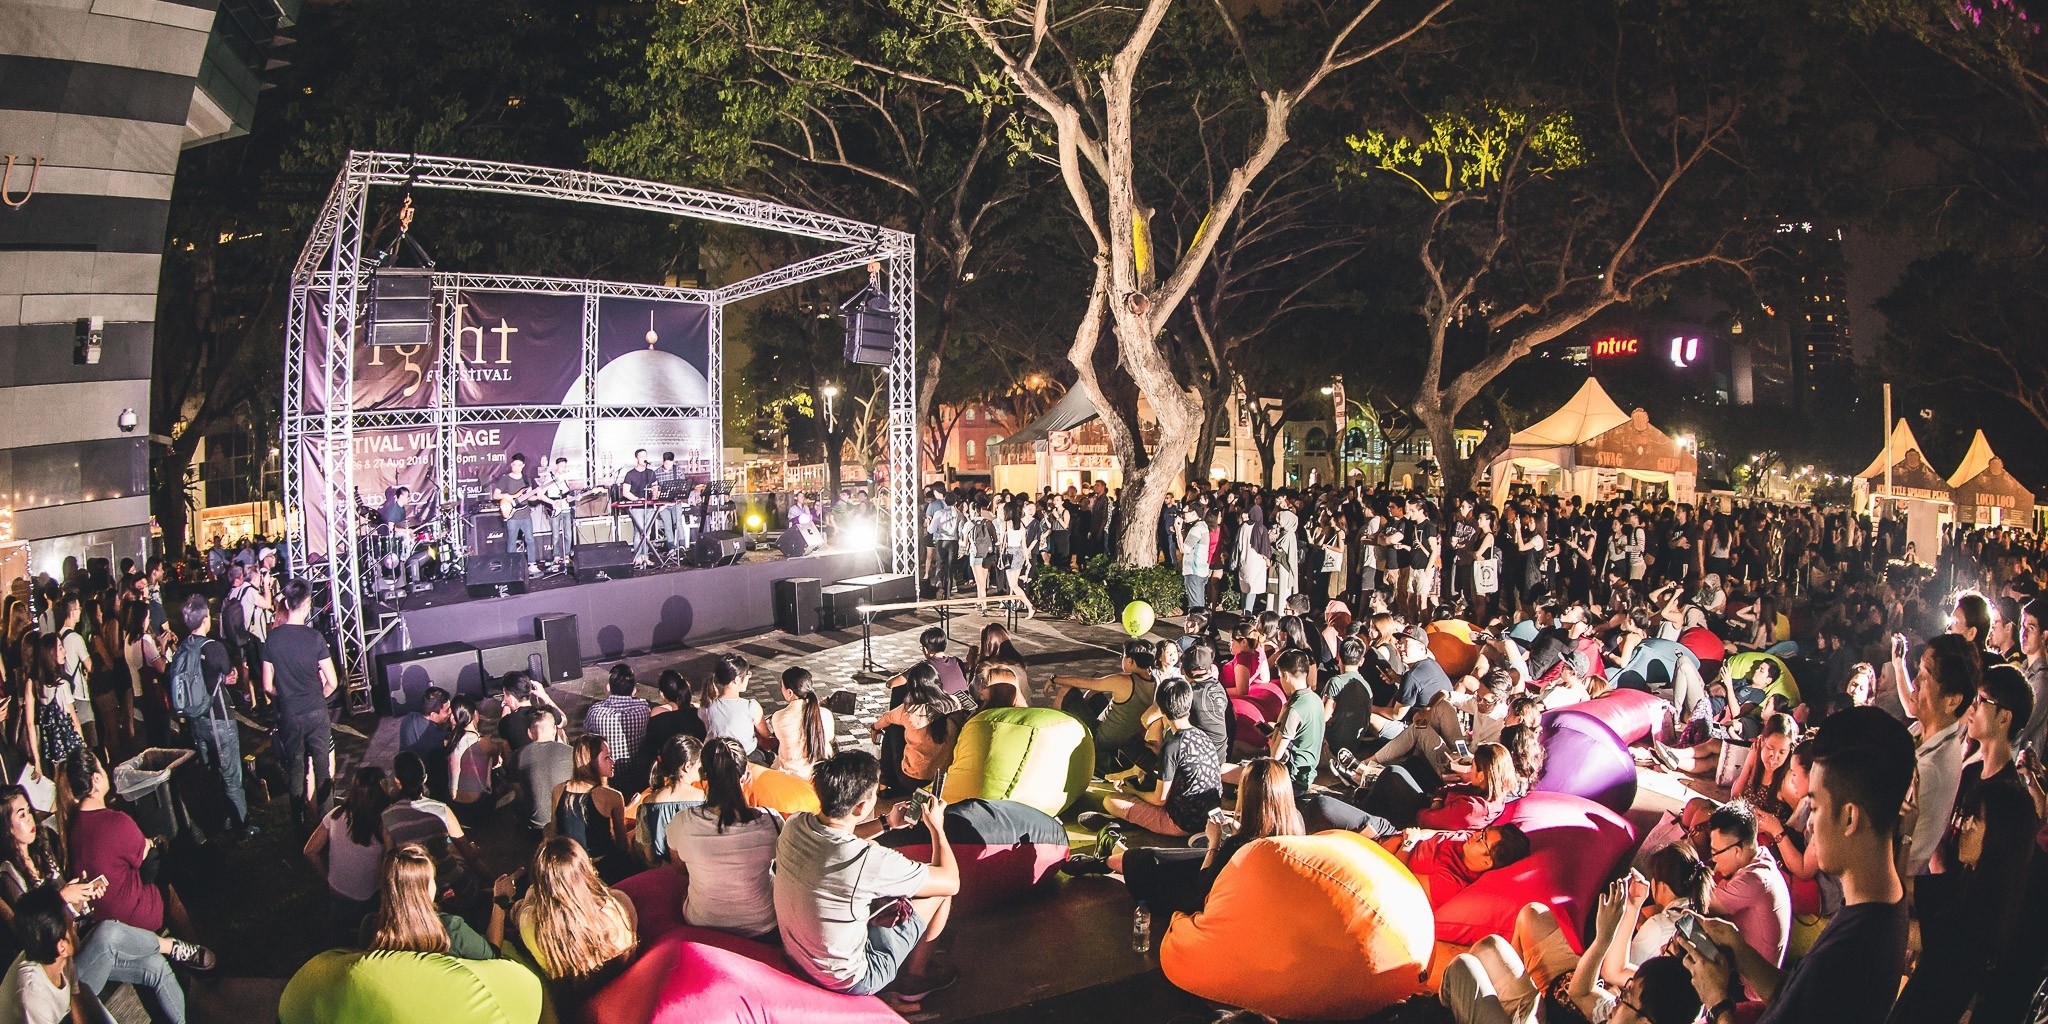 Singapore Night Festival celebrates 10th anniversary welcoming past artists 